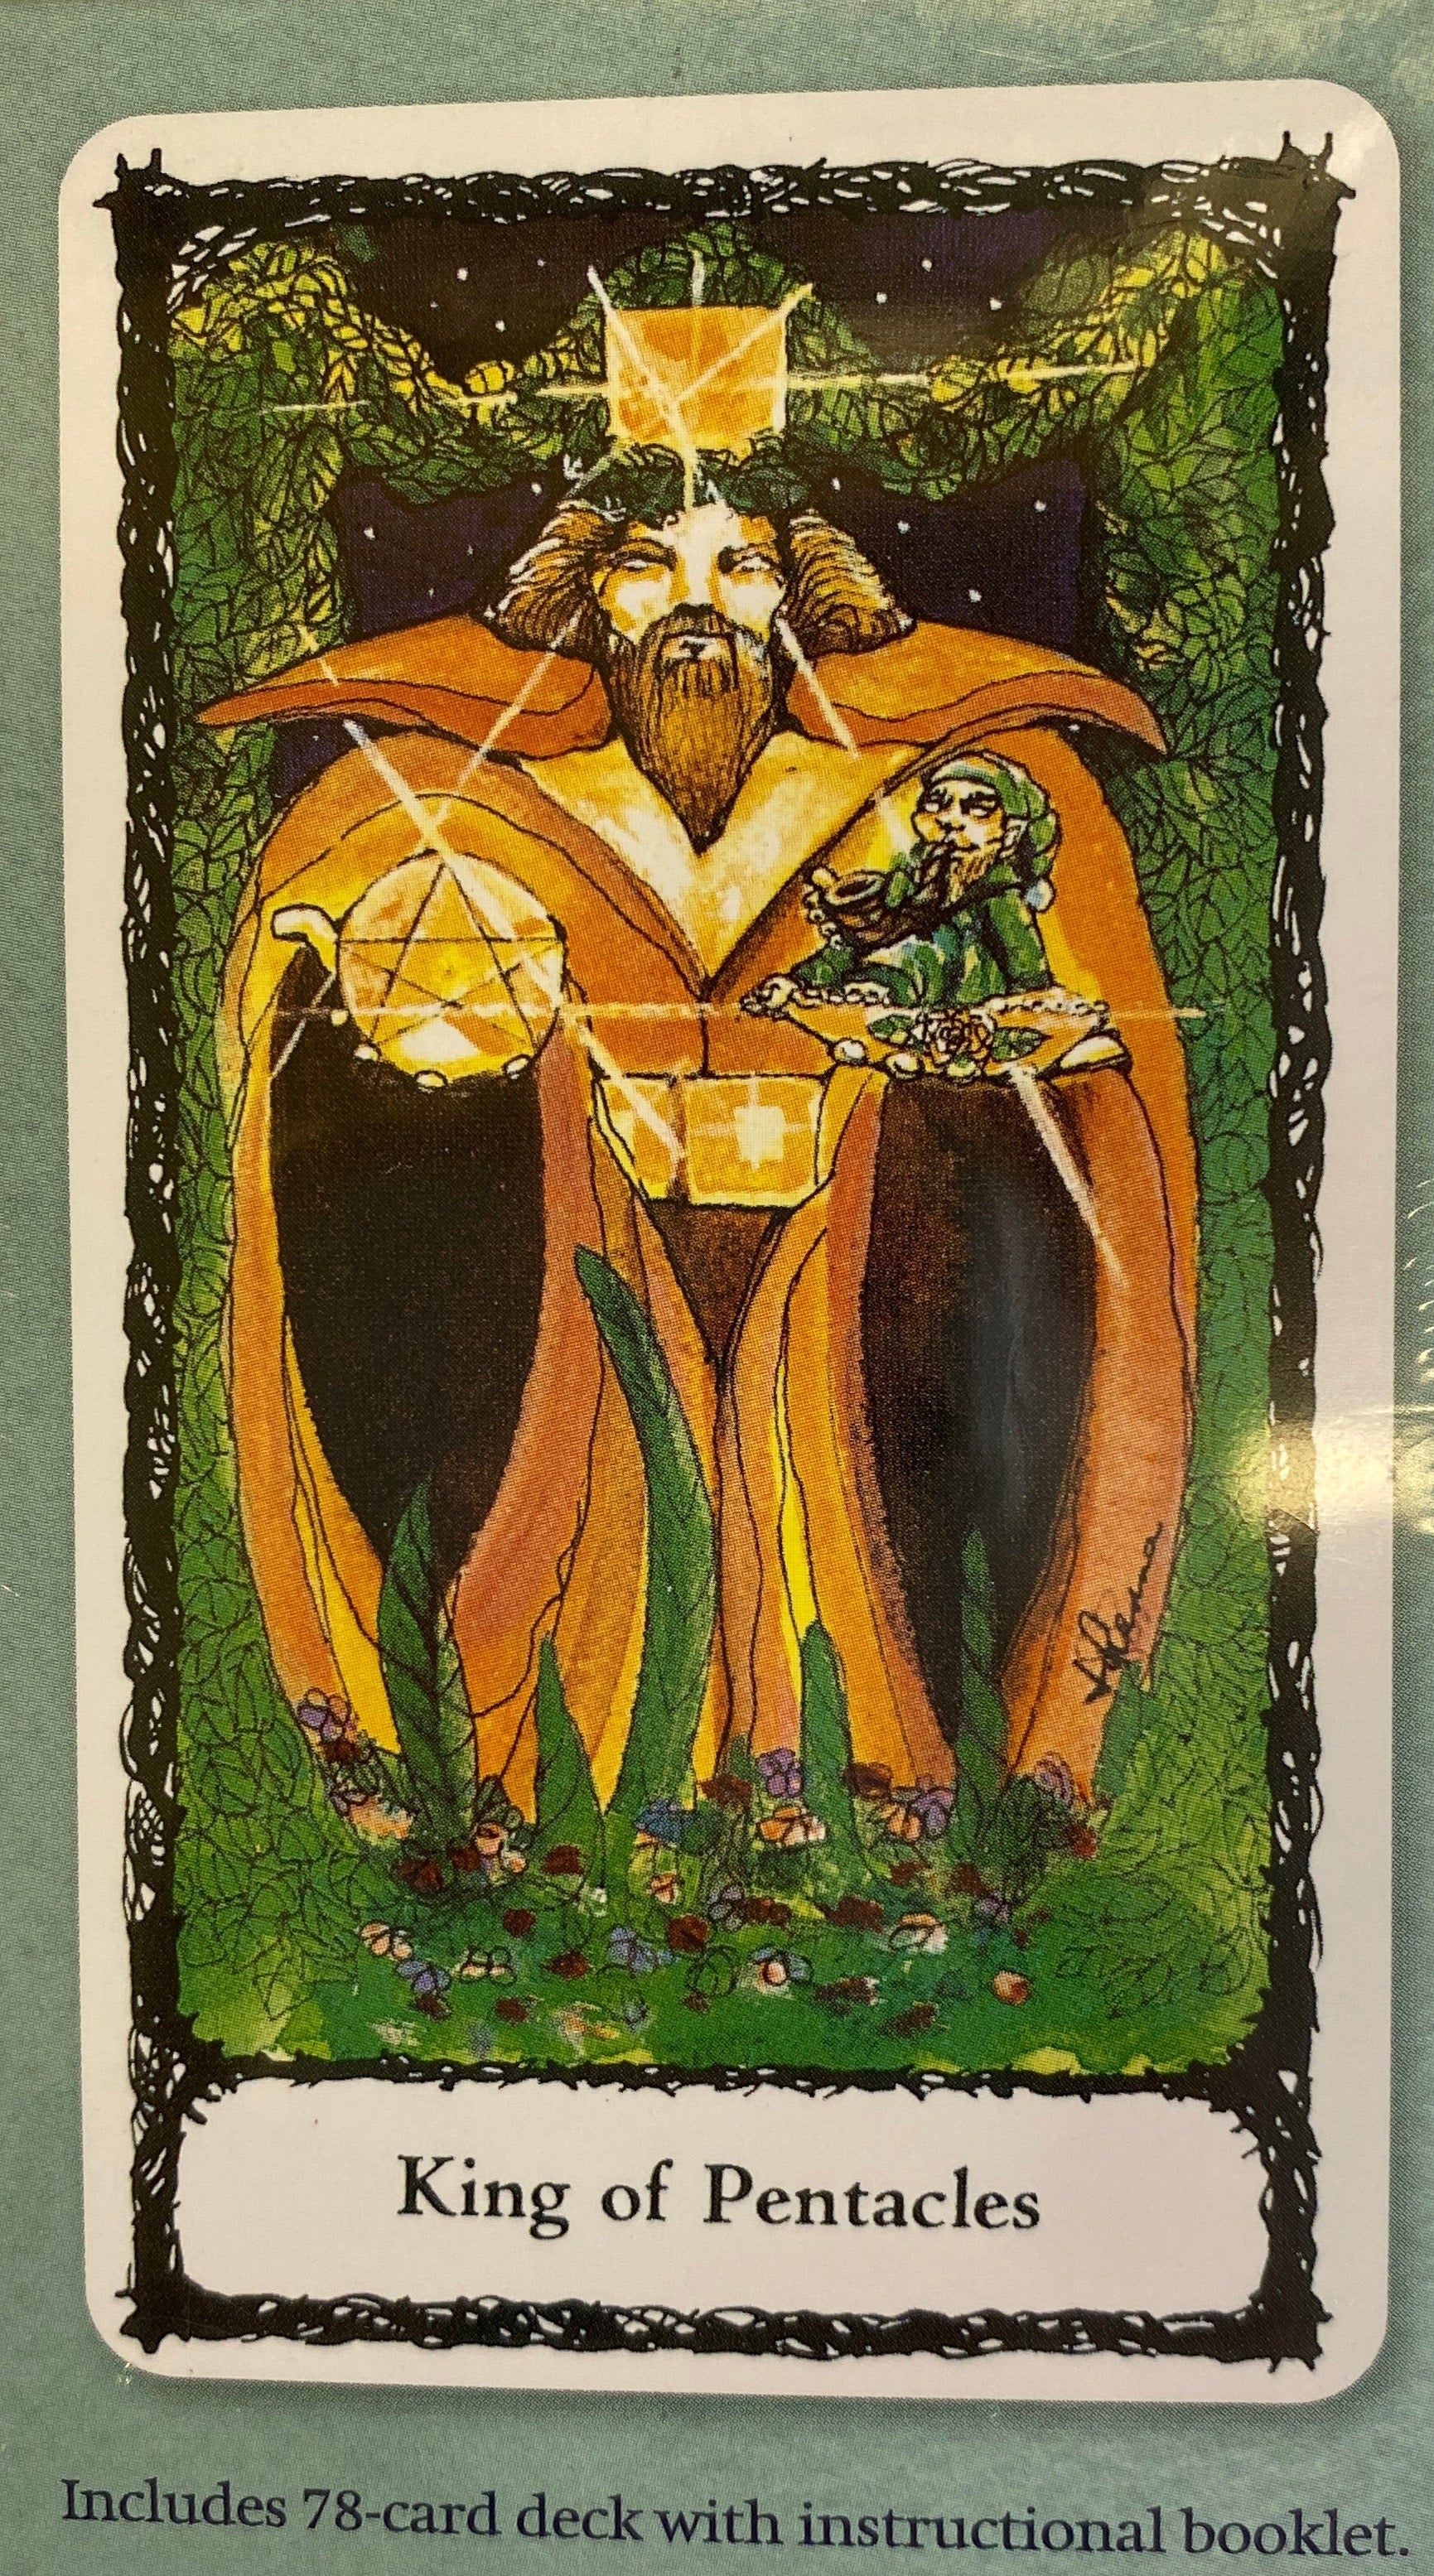 Back of box green with image of a card on back king of pentacles 